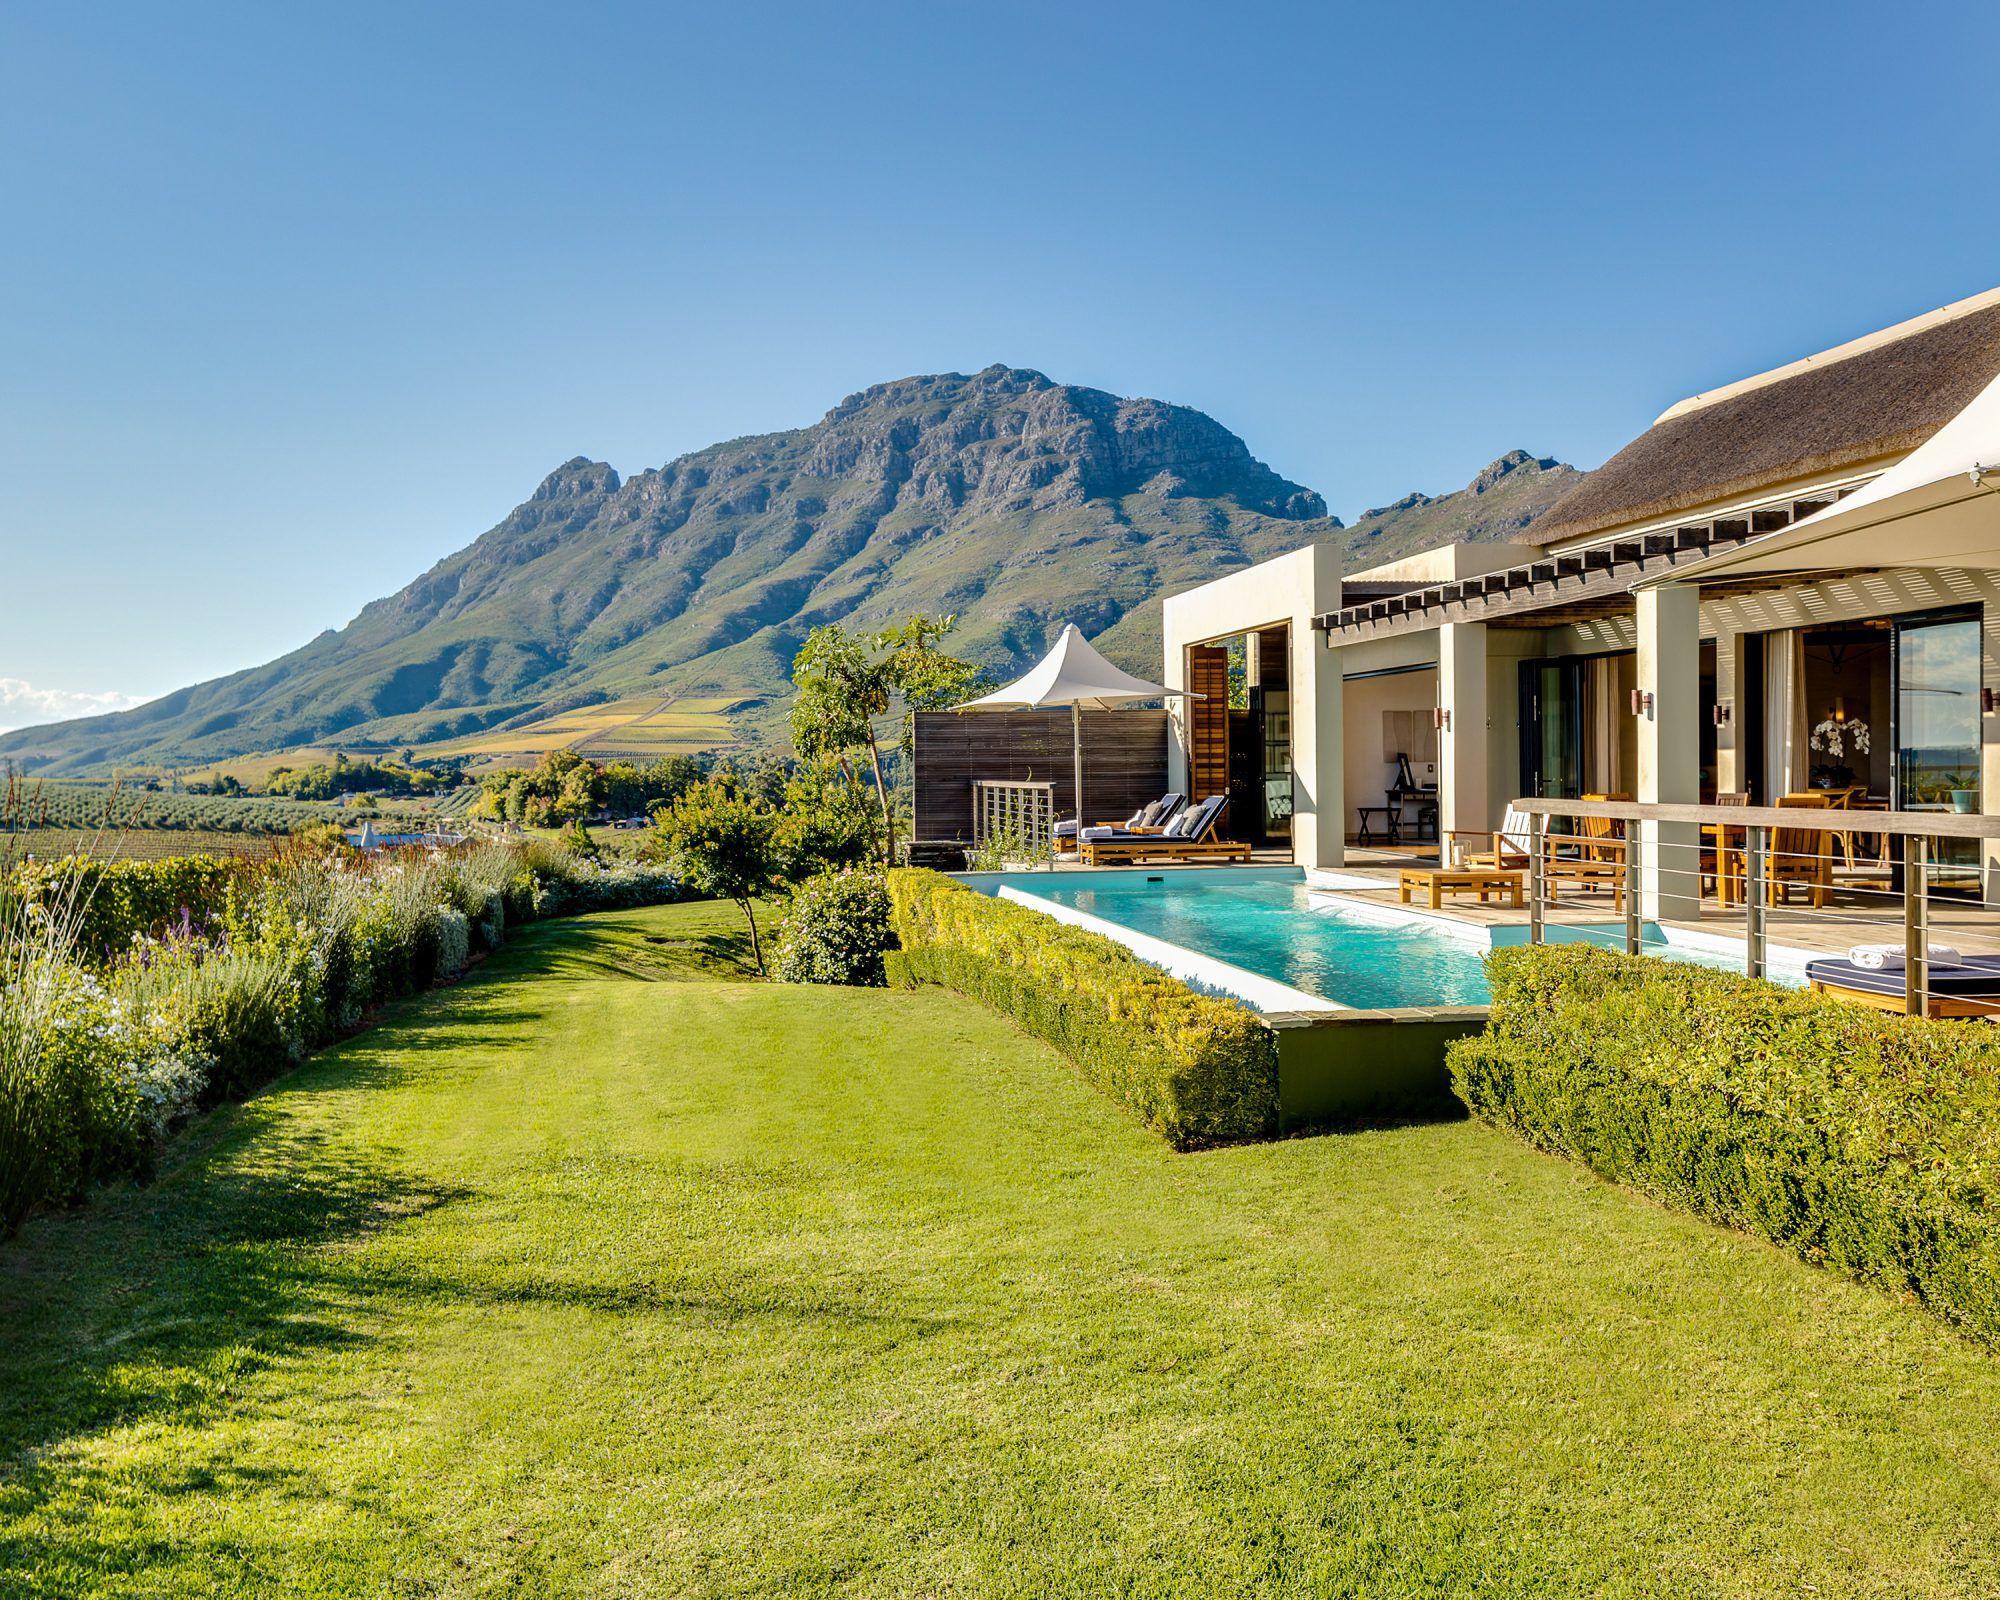 The Lodges of the Delaire Graff Estate in Stellenbosch, South Africa